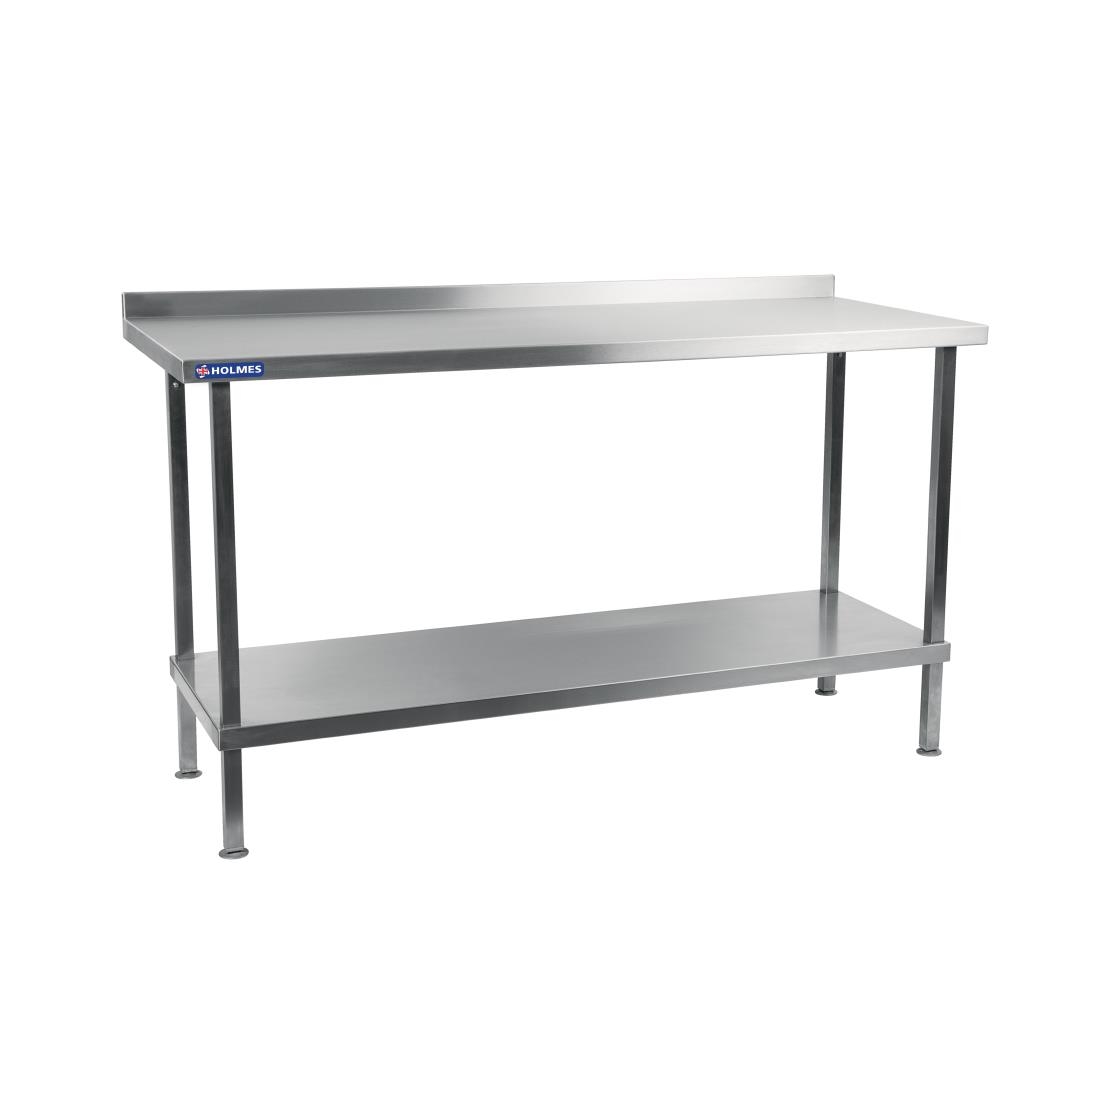 Holmes Stainless Steel Wall Table with Upstand 1800mm